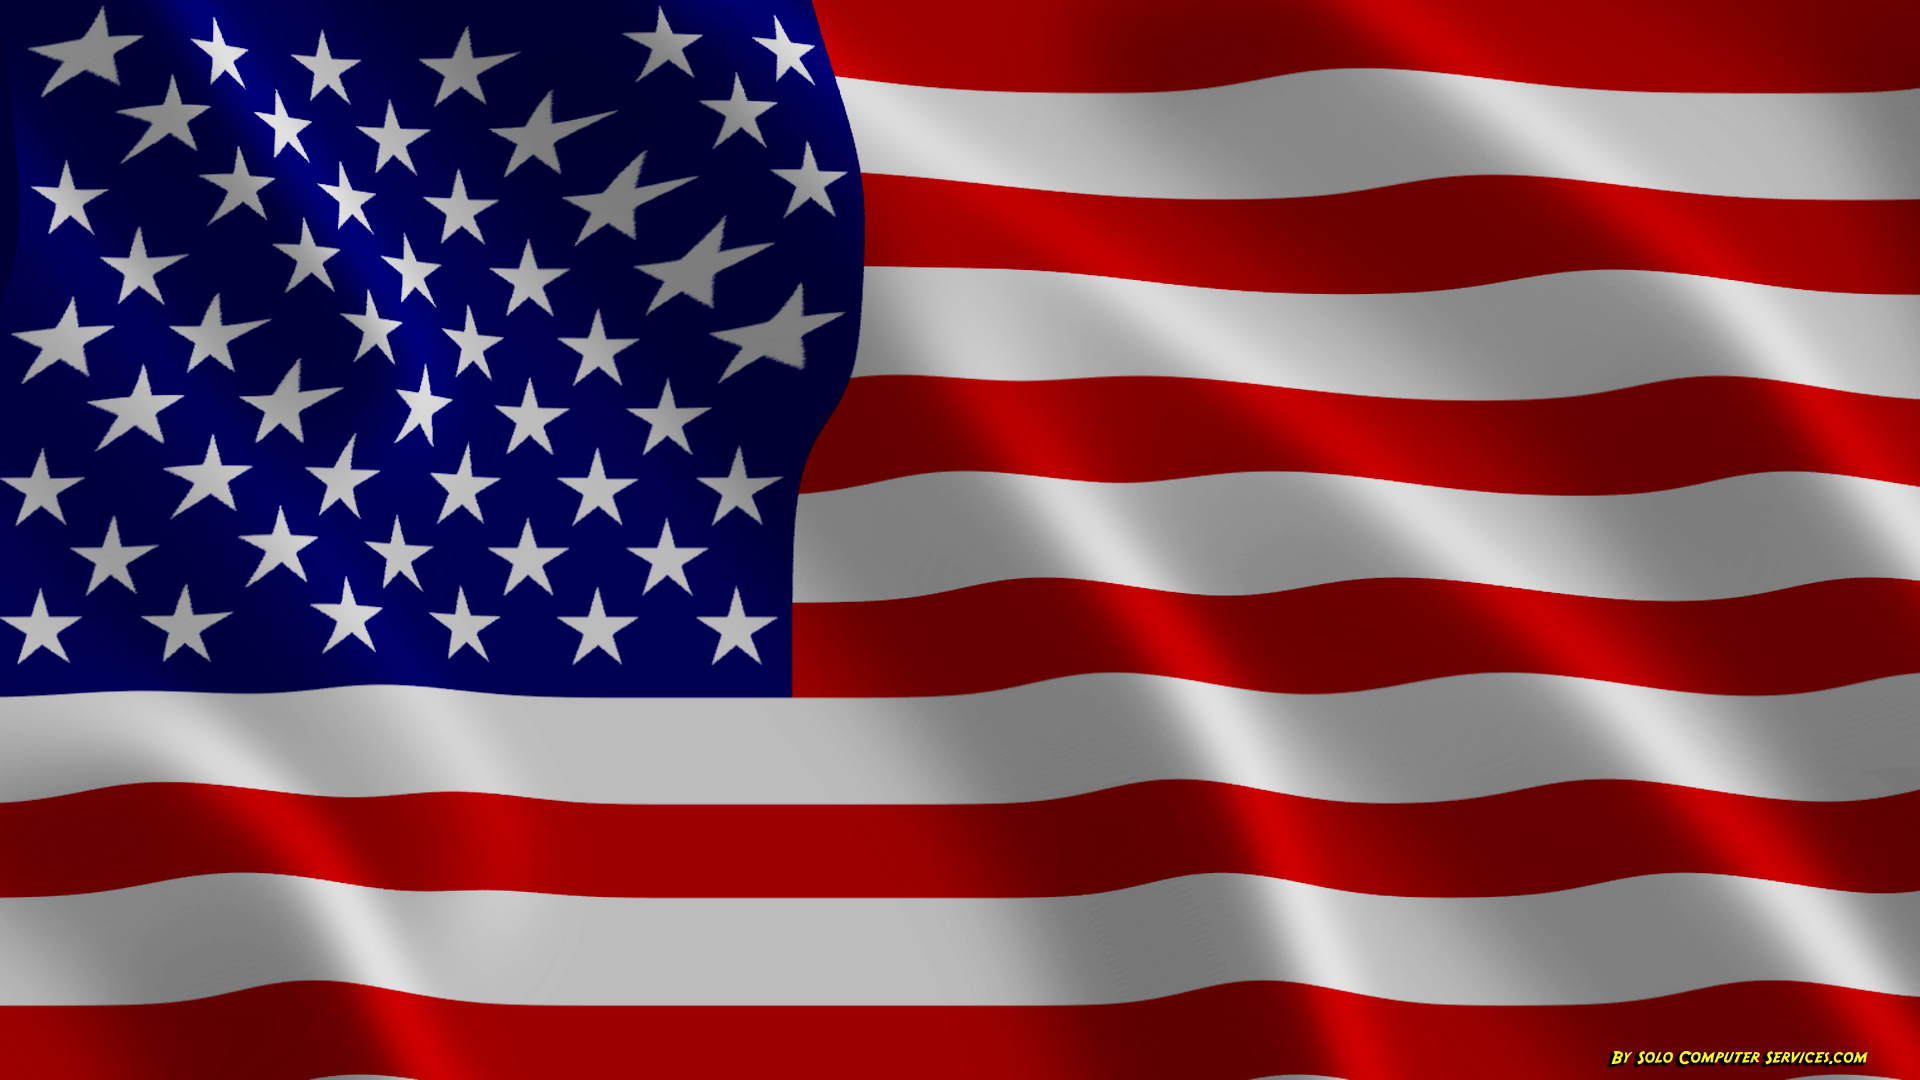 HD Usa Wallpaper The Beauty Of Diversity In